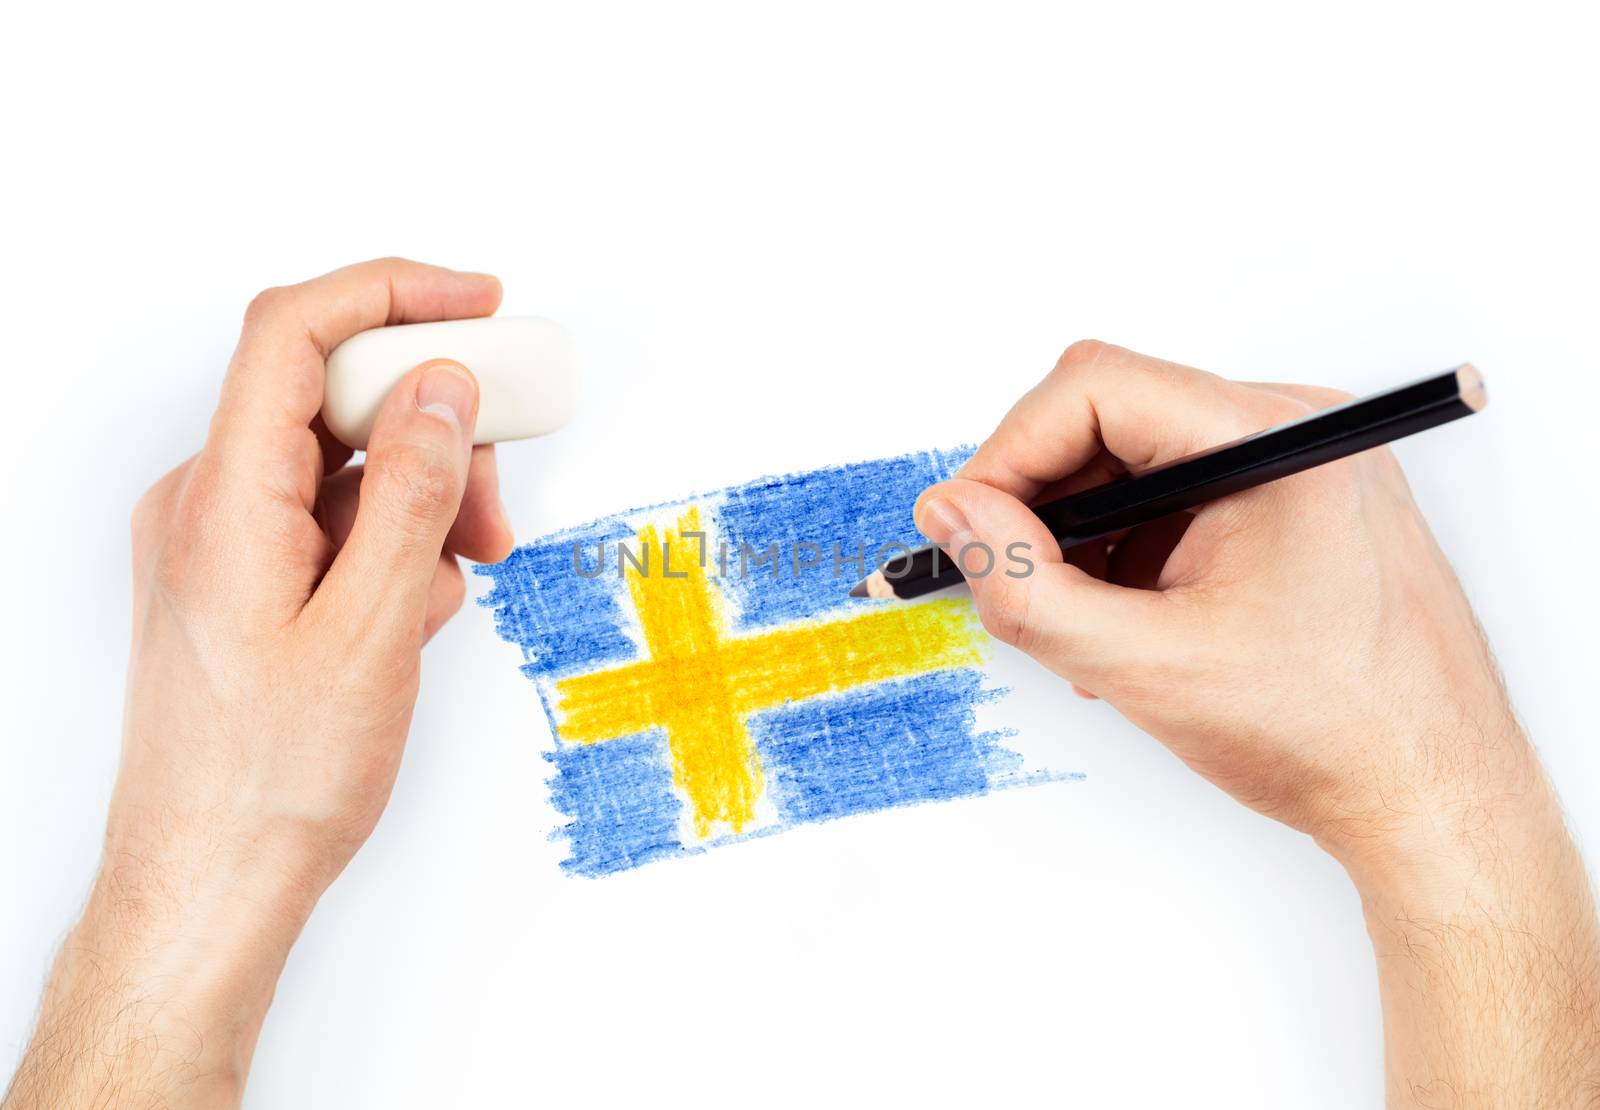 Man's hands with pencil draws flag of Sweden on white background